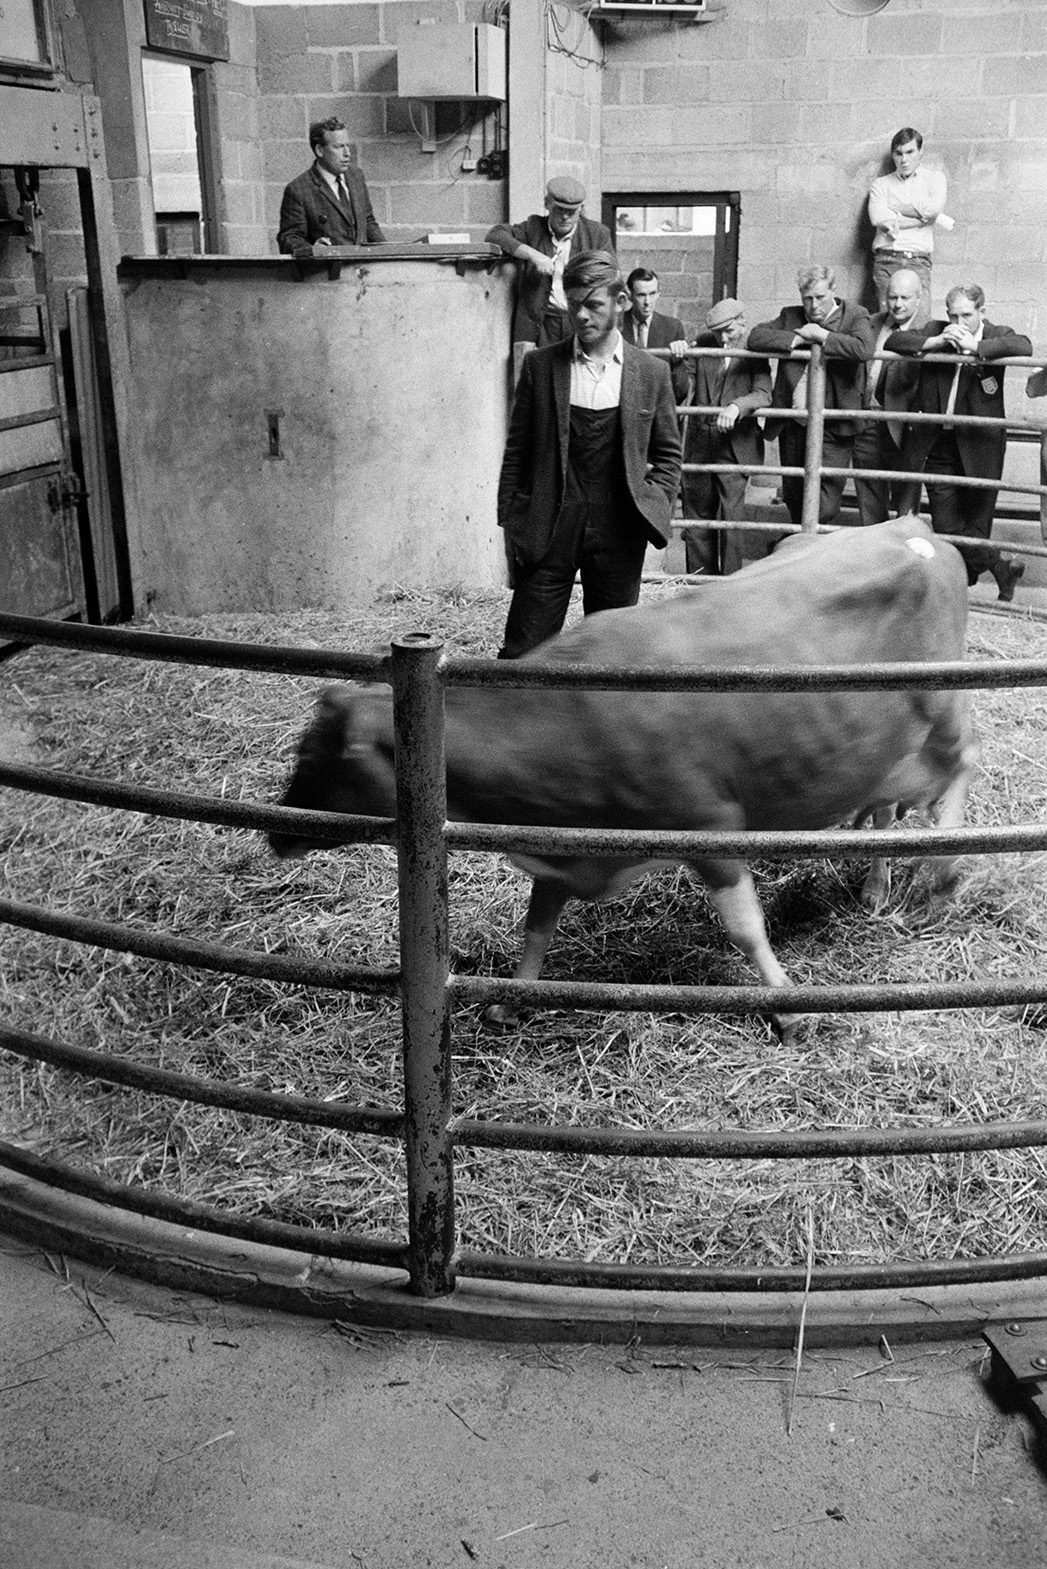 A cow being auctioned at Hatherleigh Market. Men are watching the cow being paraded in the auction ring. The auctioneer is stood in a booth by the ring.